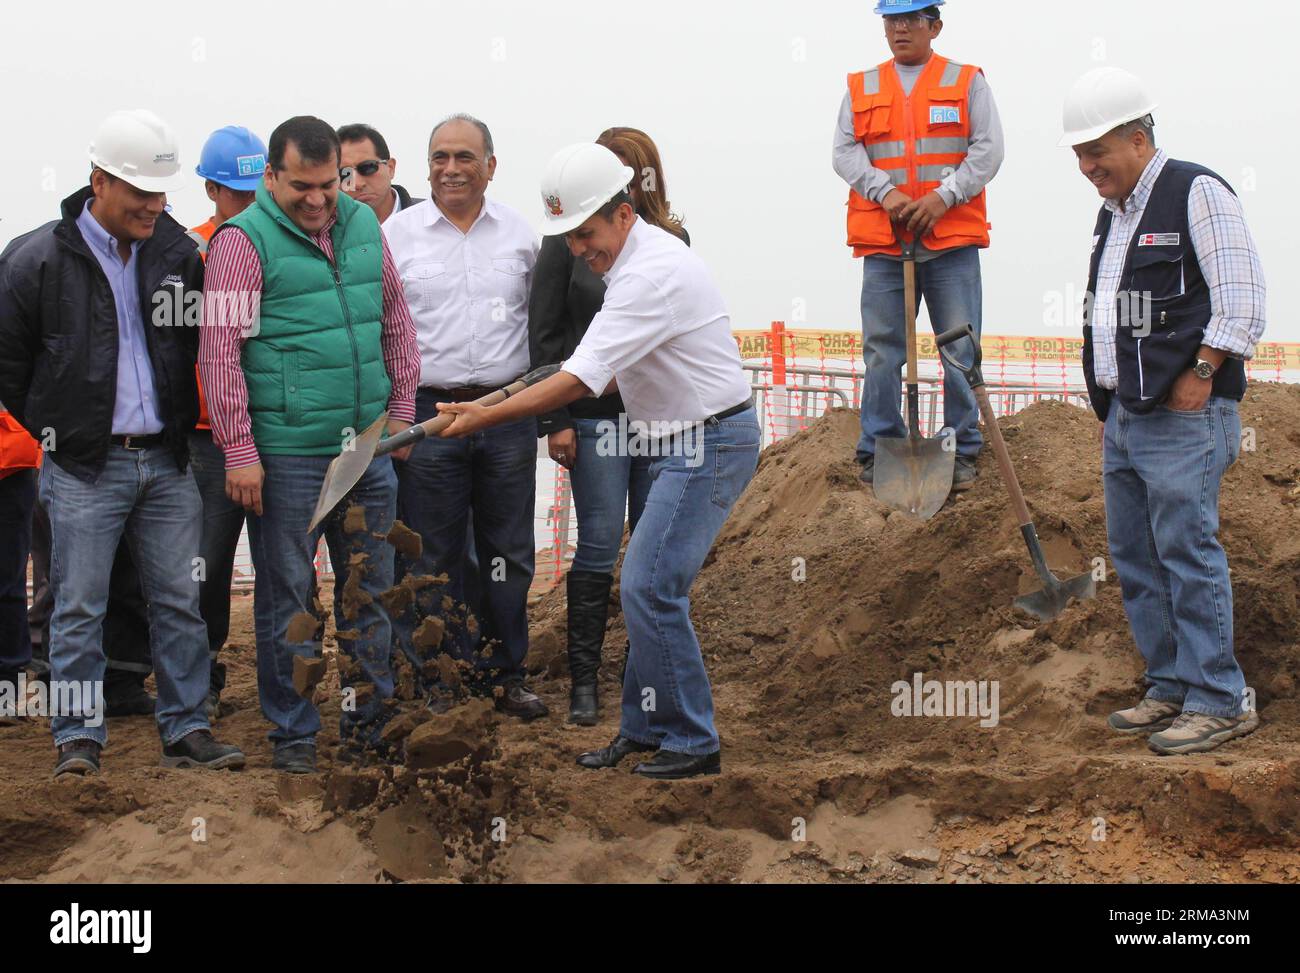 CALLAO, June 14, 2014 (Xinhua) -- President of Peru Ollanta Humala (C) takes part in the ceremony of the start of works of expansion and improvement system of drinking water and sewer for the Pachacutec Macro Project , in the district of Ventanilla, Constitutional of Callao Province, department of Lima, Peru, on June 14, 2014. The project will provide that more than 230,000 people to have drinking water and sewer in their homes, according to local press. (Xinhua/Luis Camacho) (jp) PERU-CALLAO-POLITICS-HUMALA PUBLICATIONxNOTxINxCHN   Callao June 14 2014 XINHUA President of Peru Ollanta Humala C Stock Photo